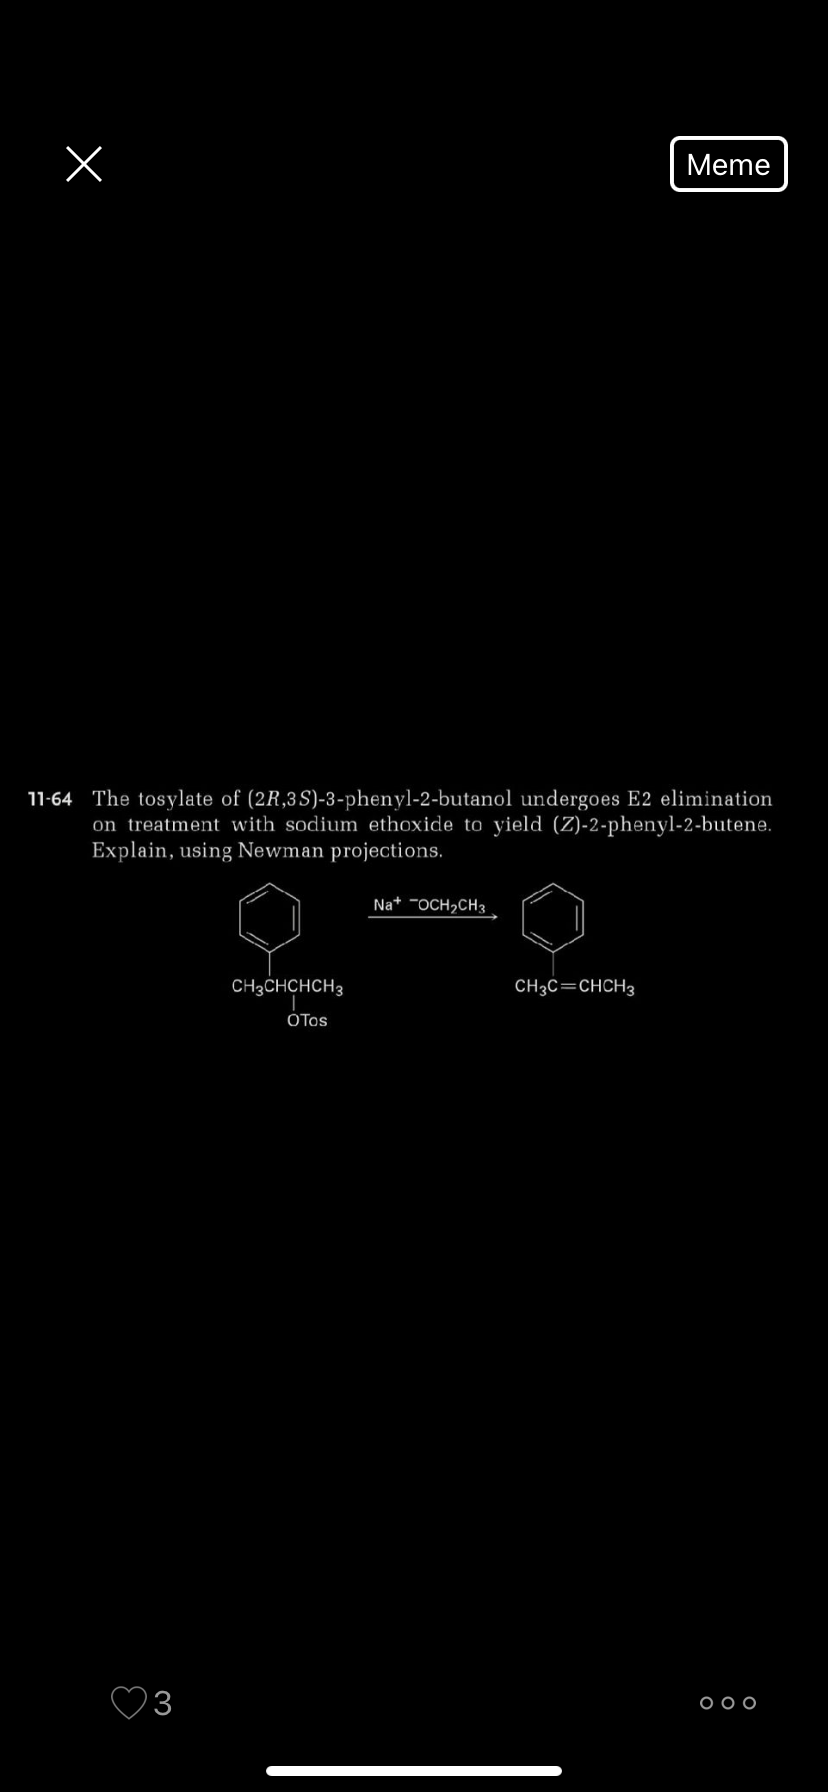 Meme
11-64 The tosylate of (2R,3S)-3-phenyl-2-butanol undergoes E2 elimination
on treatment with sodium ethoxide to yield (Z)-2-phenyl-2-butene.
Explain, using Newman projections.
Na* -OCH,CH3
CH3CHCHCH3
CH3C=CHCH3
OTos
3
